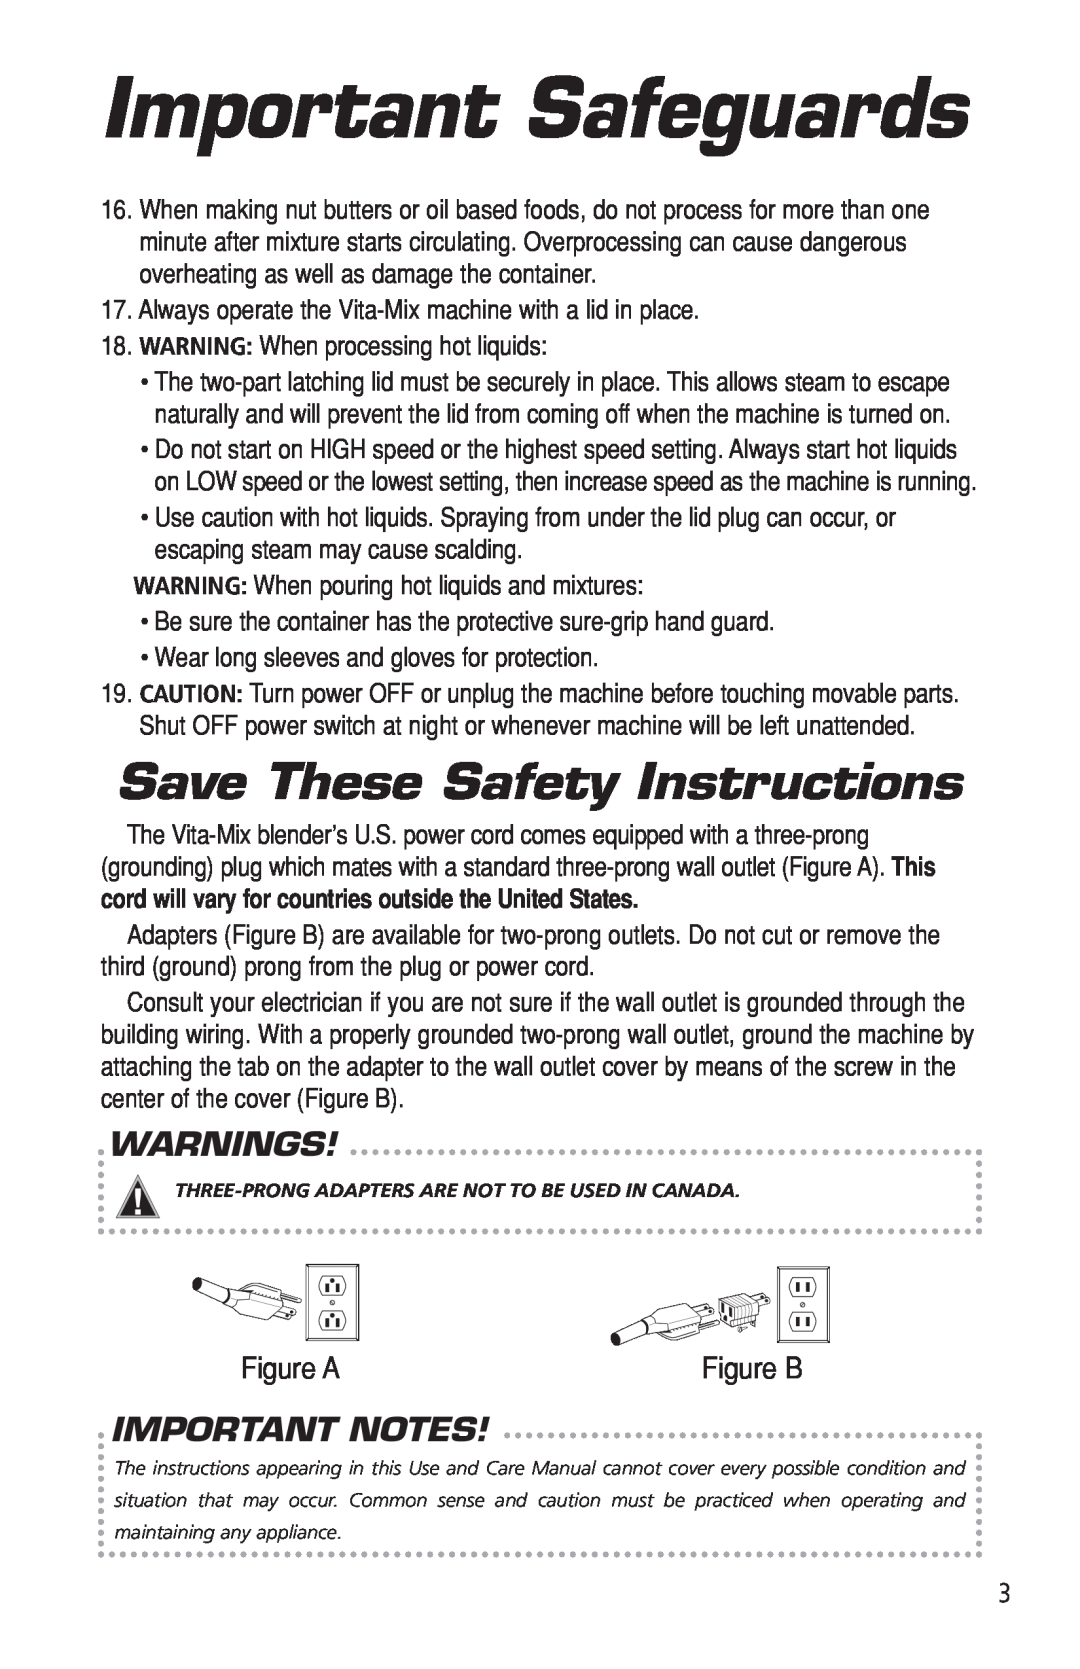 Vita-Mix VM0141 manual Warnings, Important Notes, Important Safeguards, Save These Safety Instructions, Figure A 